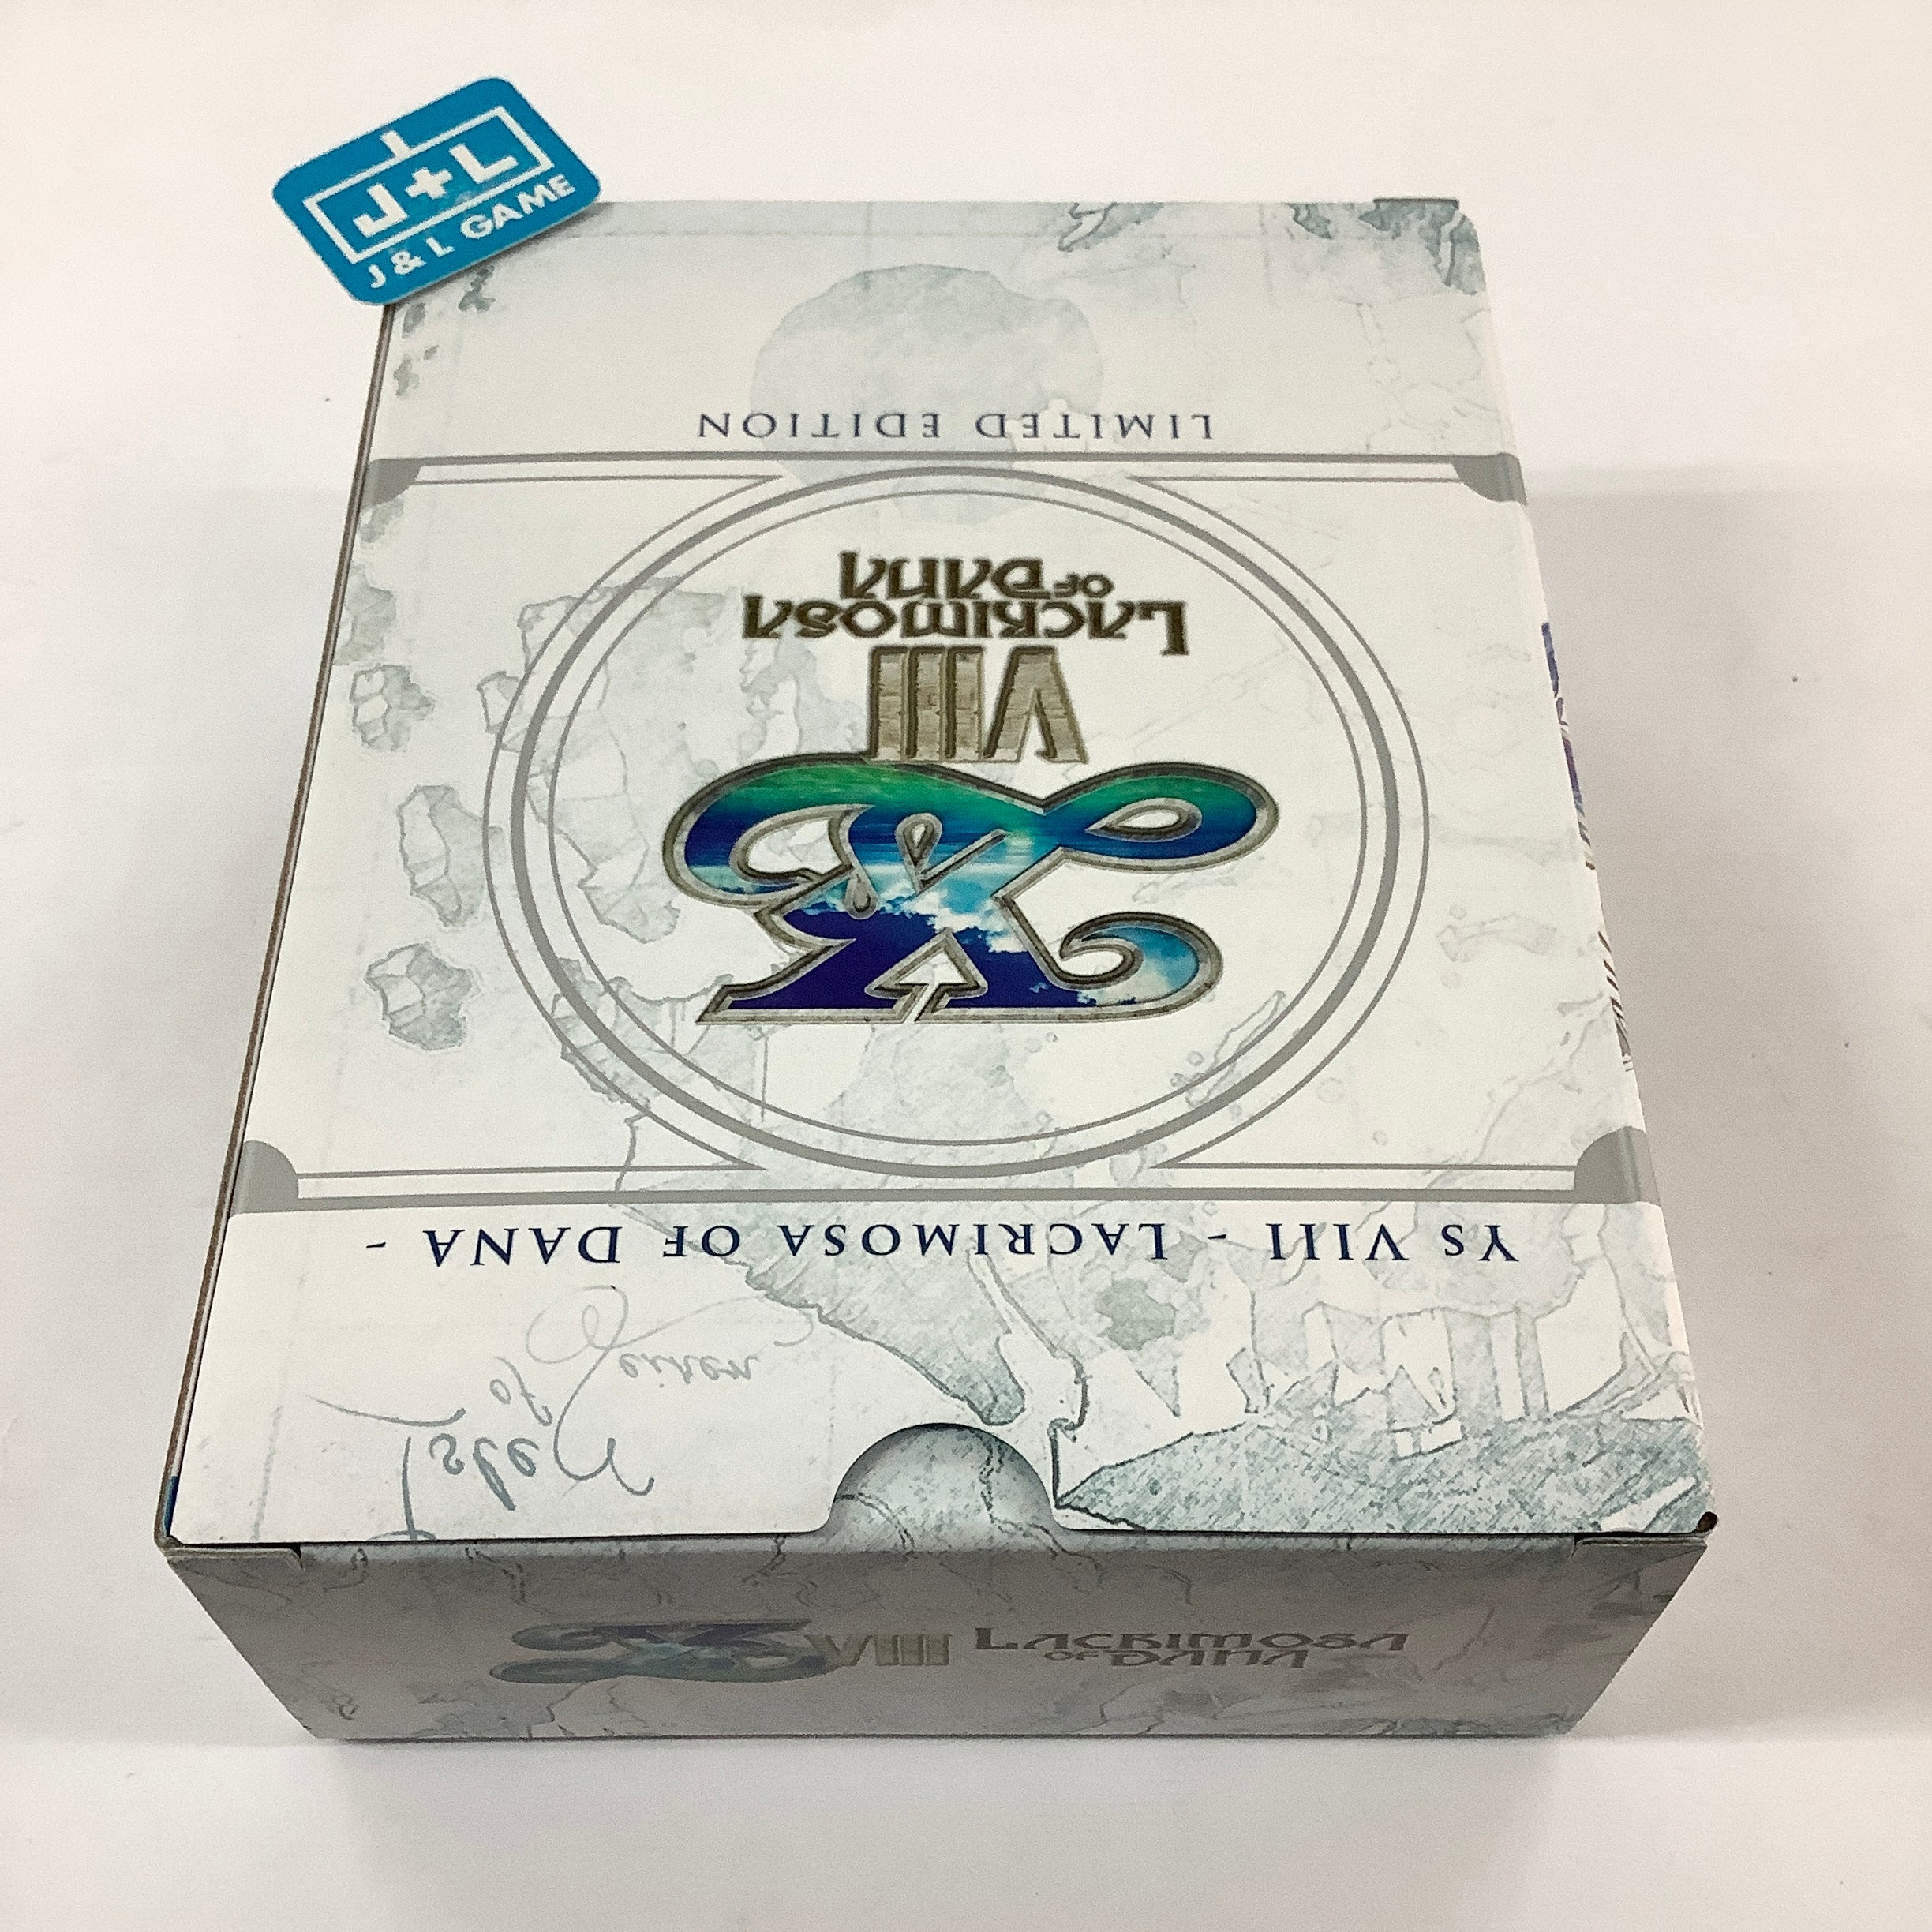 Ys VIII: Lacrimosa Of Dana Limited Edition - (NSW) Nintendo Switch [Pre-Owned] Video Games NIS America, Inc.   